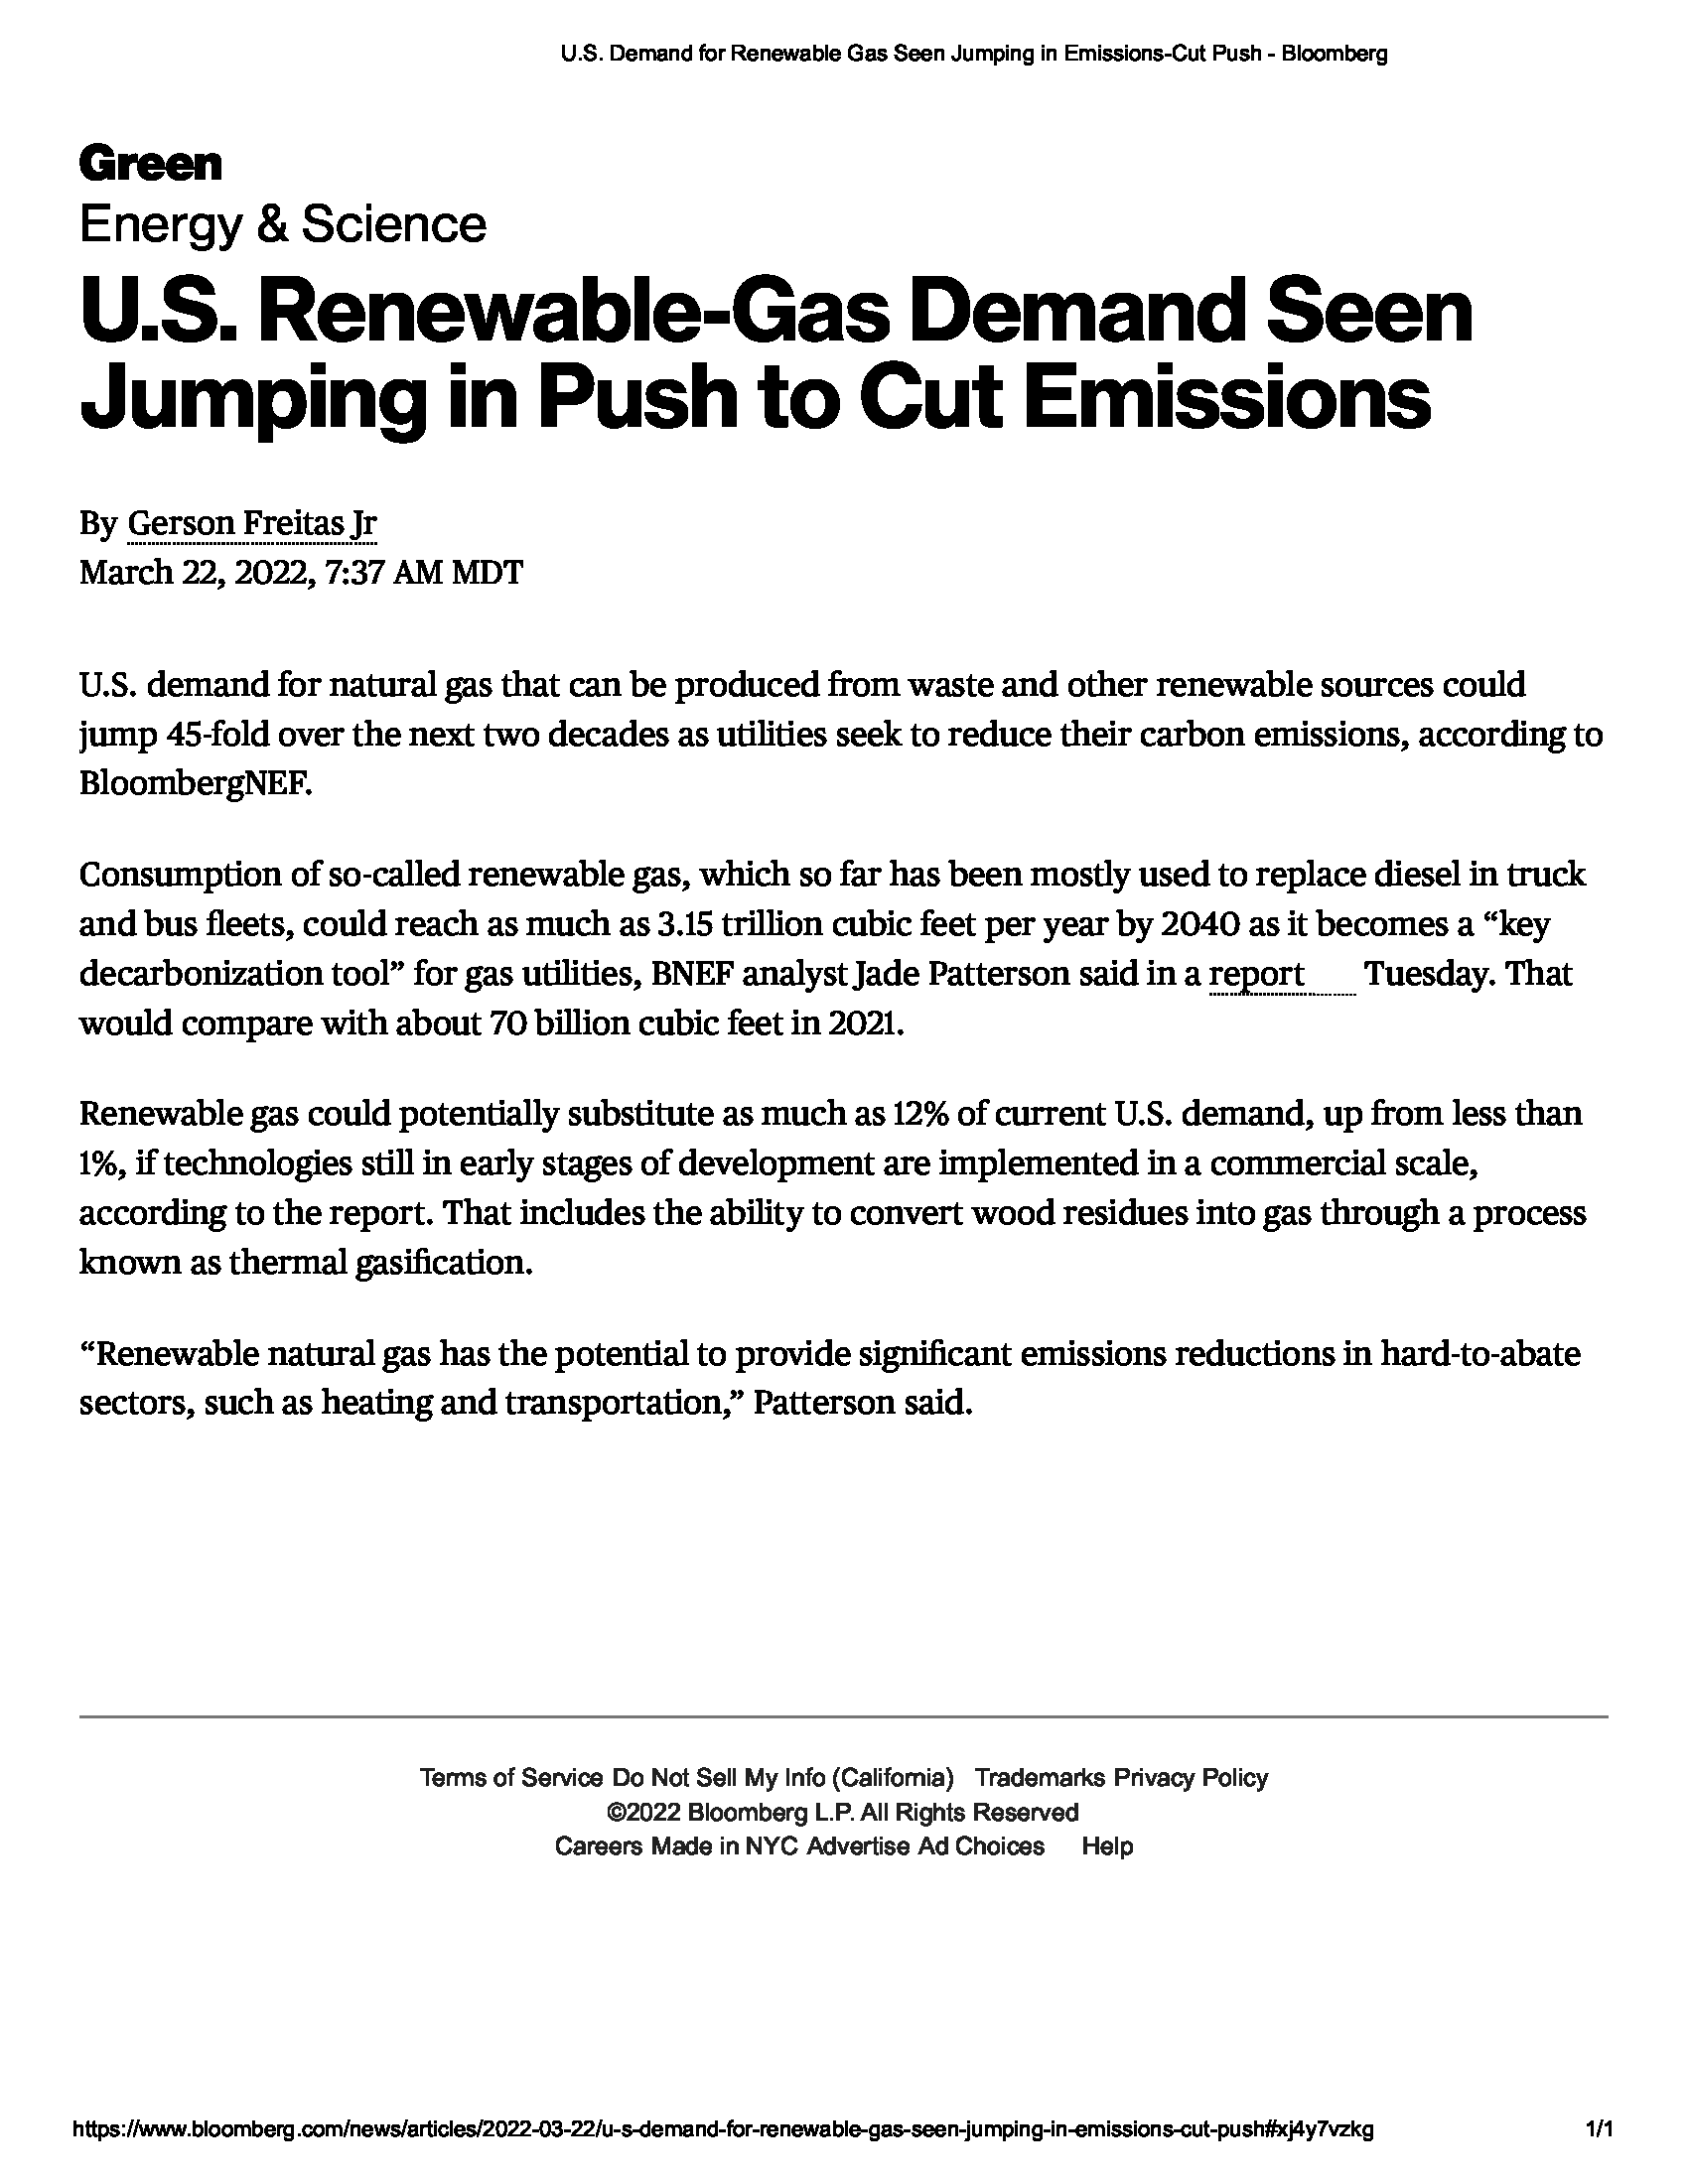 U.S. Renewable-Gas Demand Seen Jumping in Push to Cut Emissions Bloomberg 03222022.png